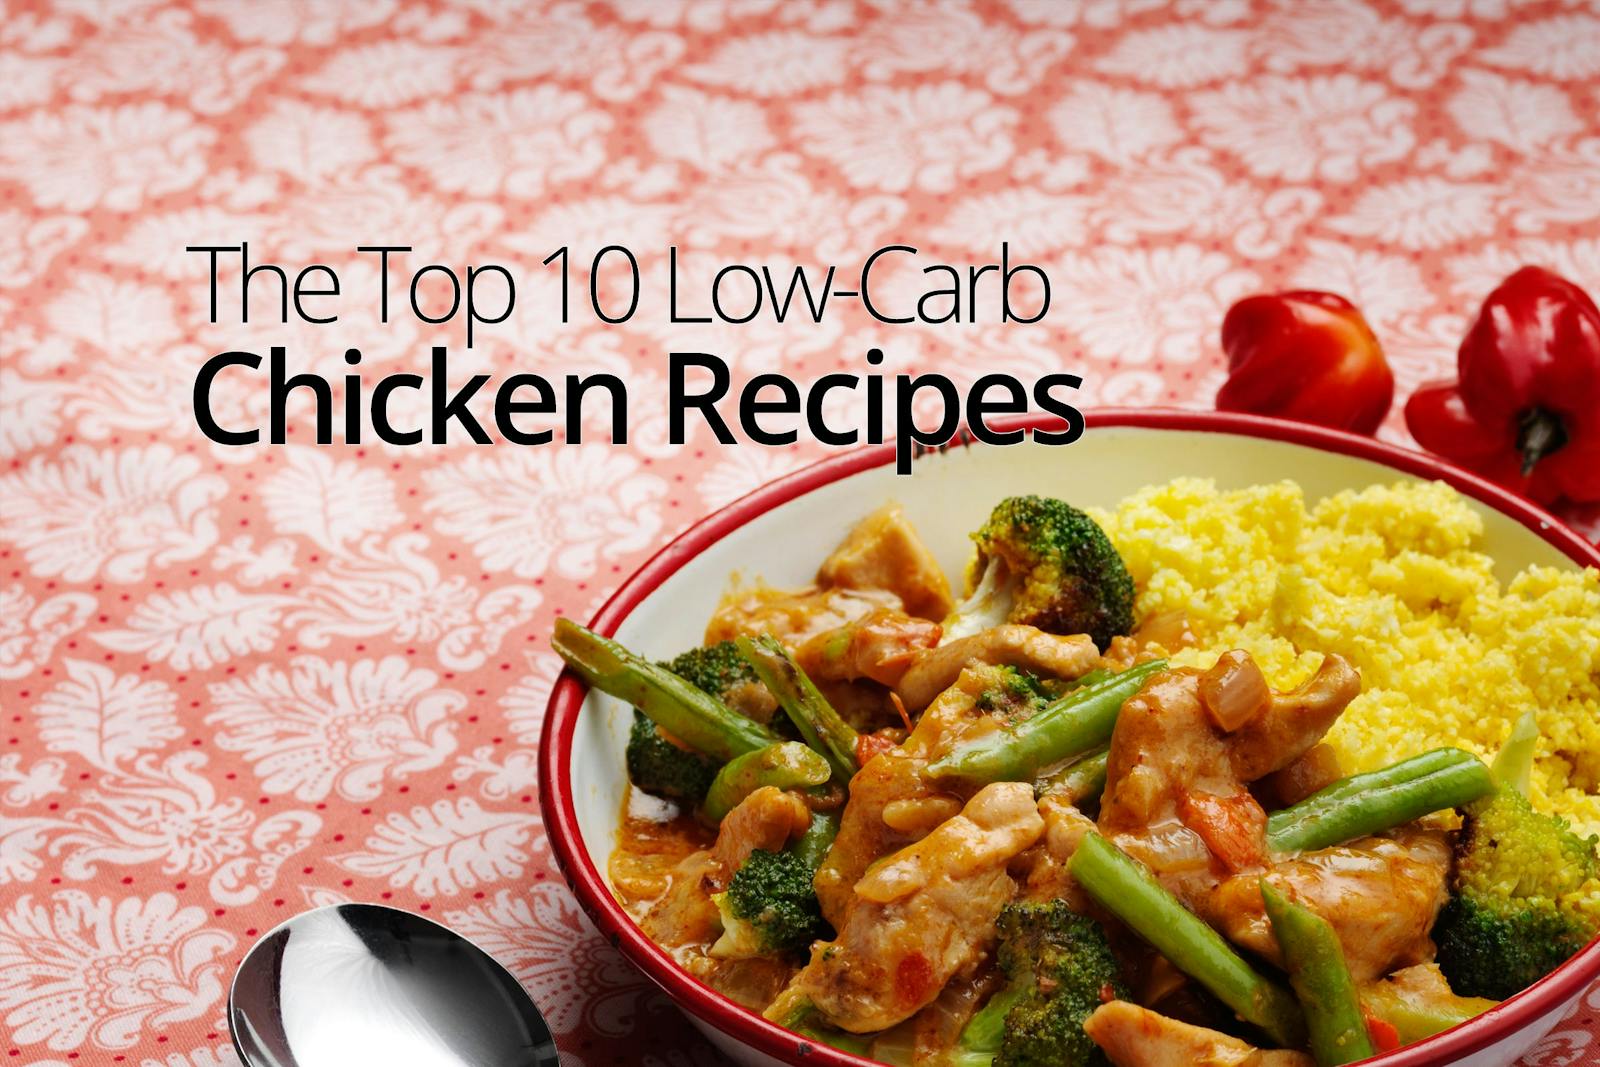 Top 10 low-carb chicken recipes